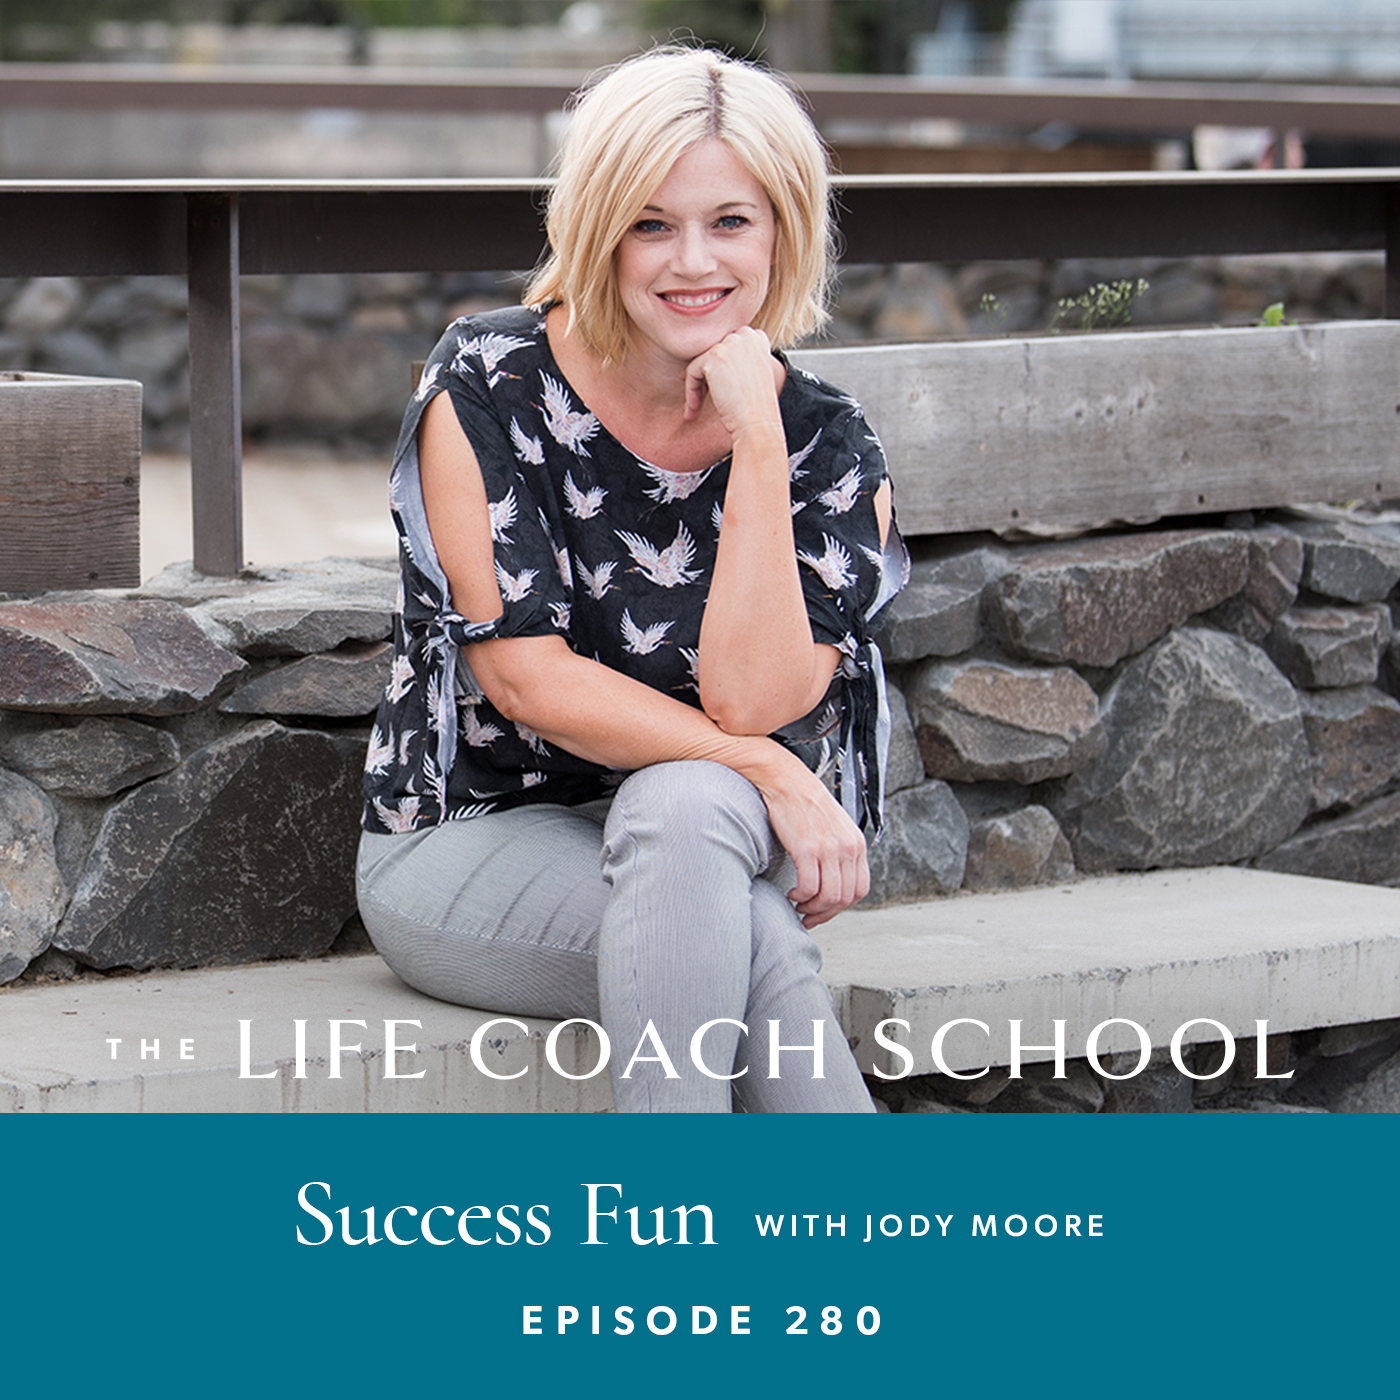 The Life Coach School Podcast with Brooke Castillo | Episode 280 | Success Fun with Jody Moore